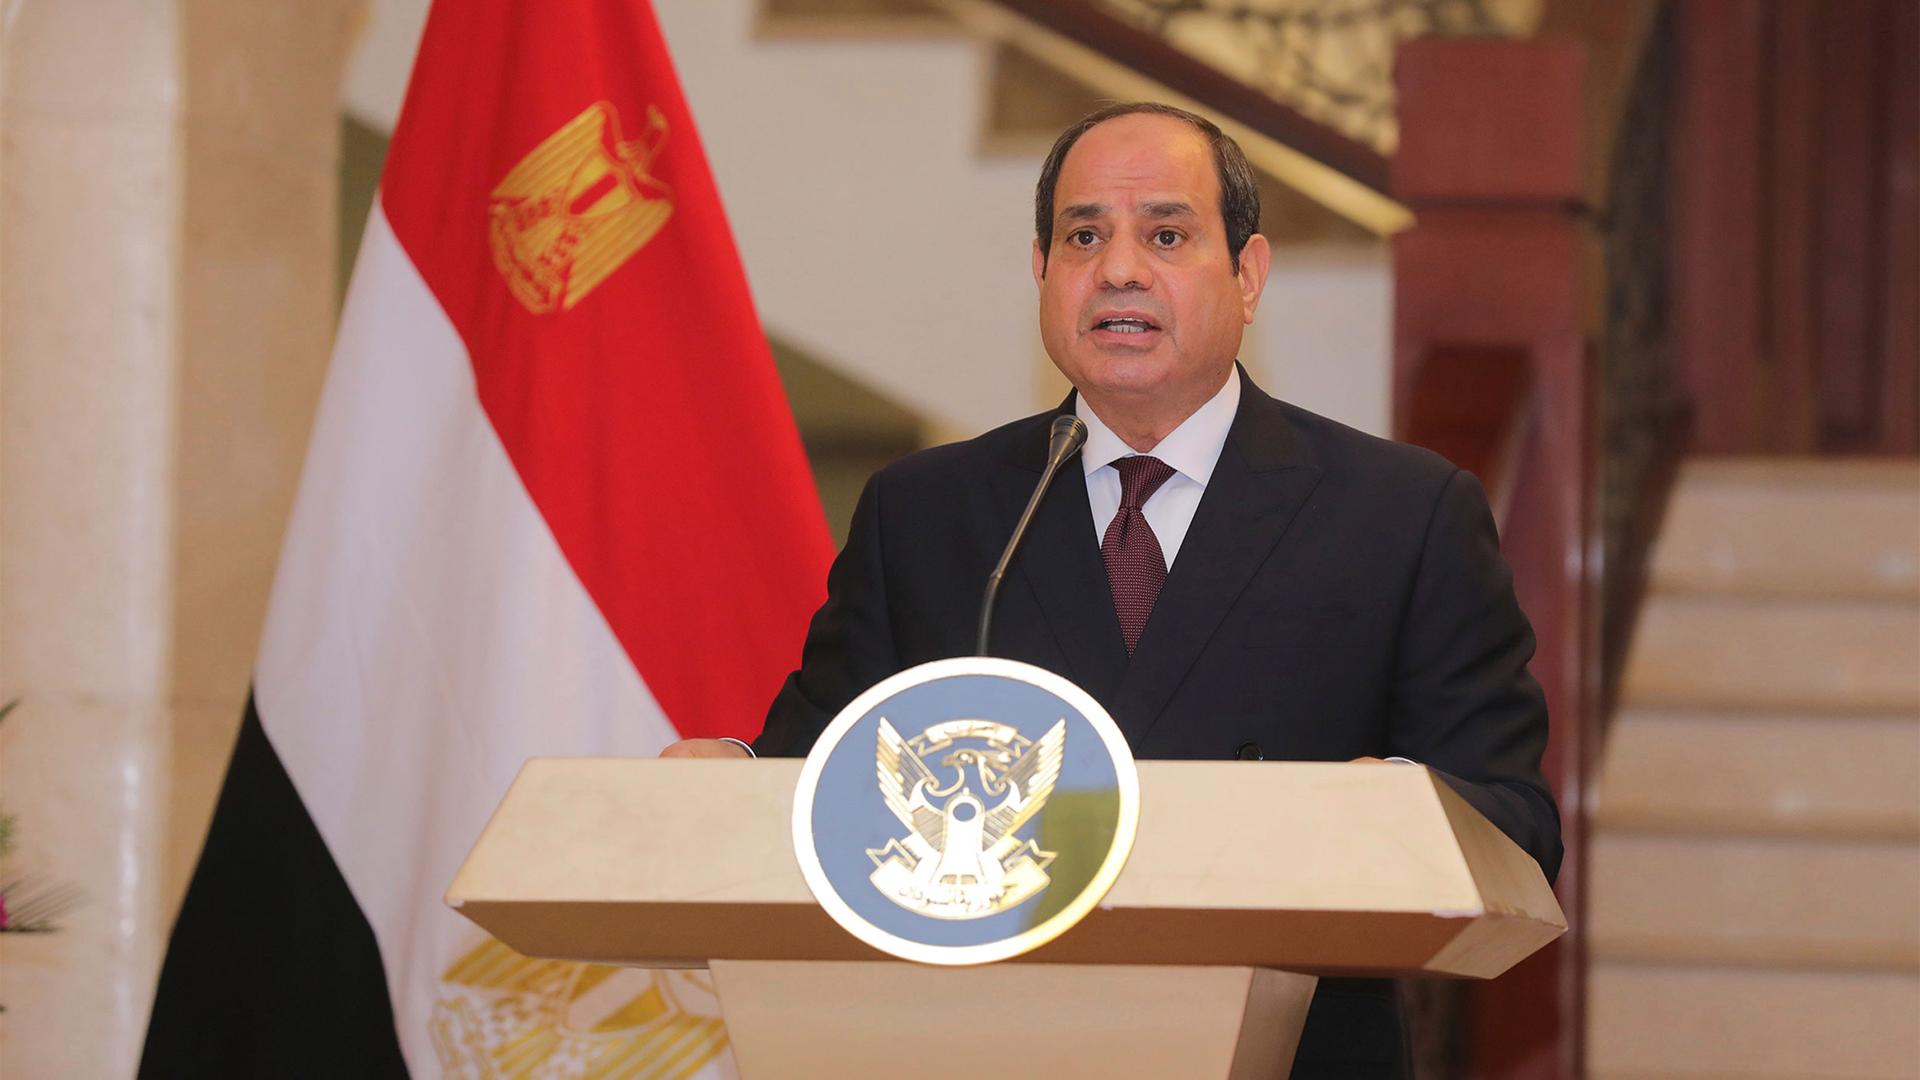 Egyptian President Abdel Fattah al-Sisi holds a news conference at the Presidential Palace in Khartoum, Sudan